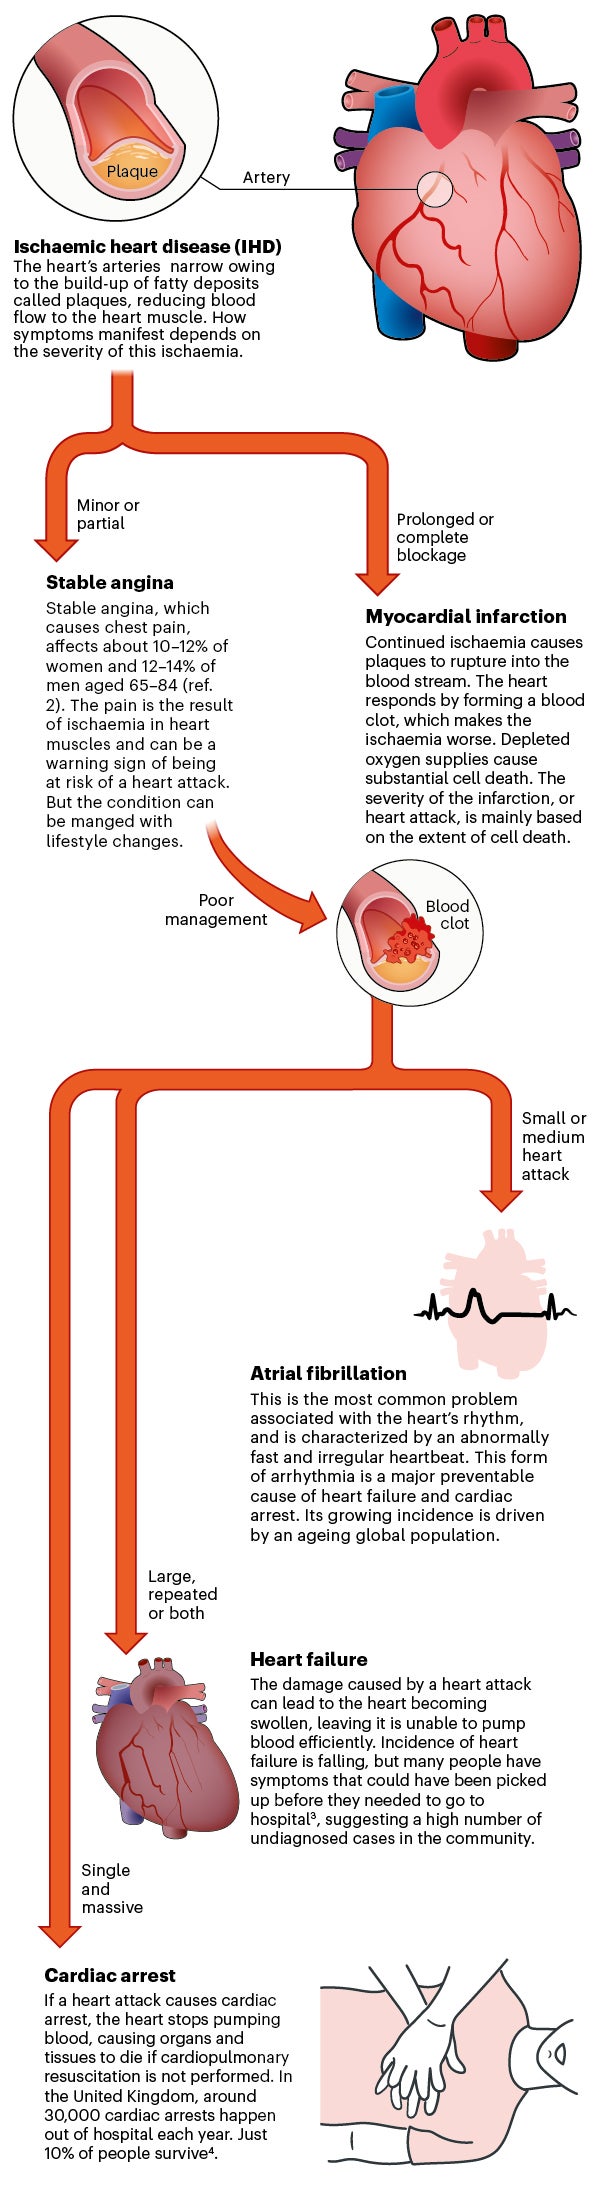 A Graphical Guide To Ischemic Heart Disease Scientific American 0116